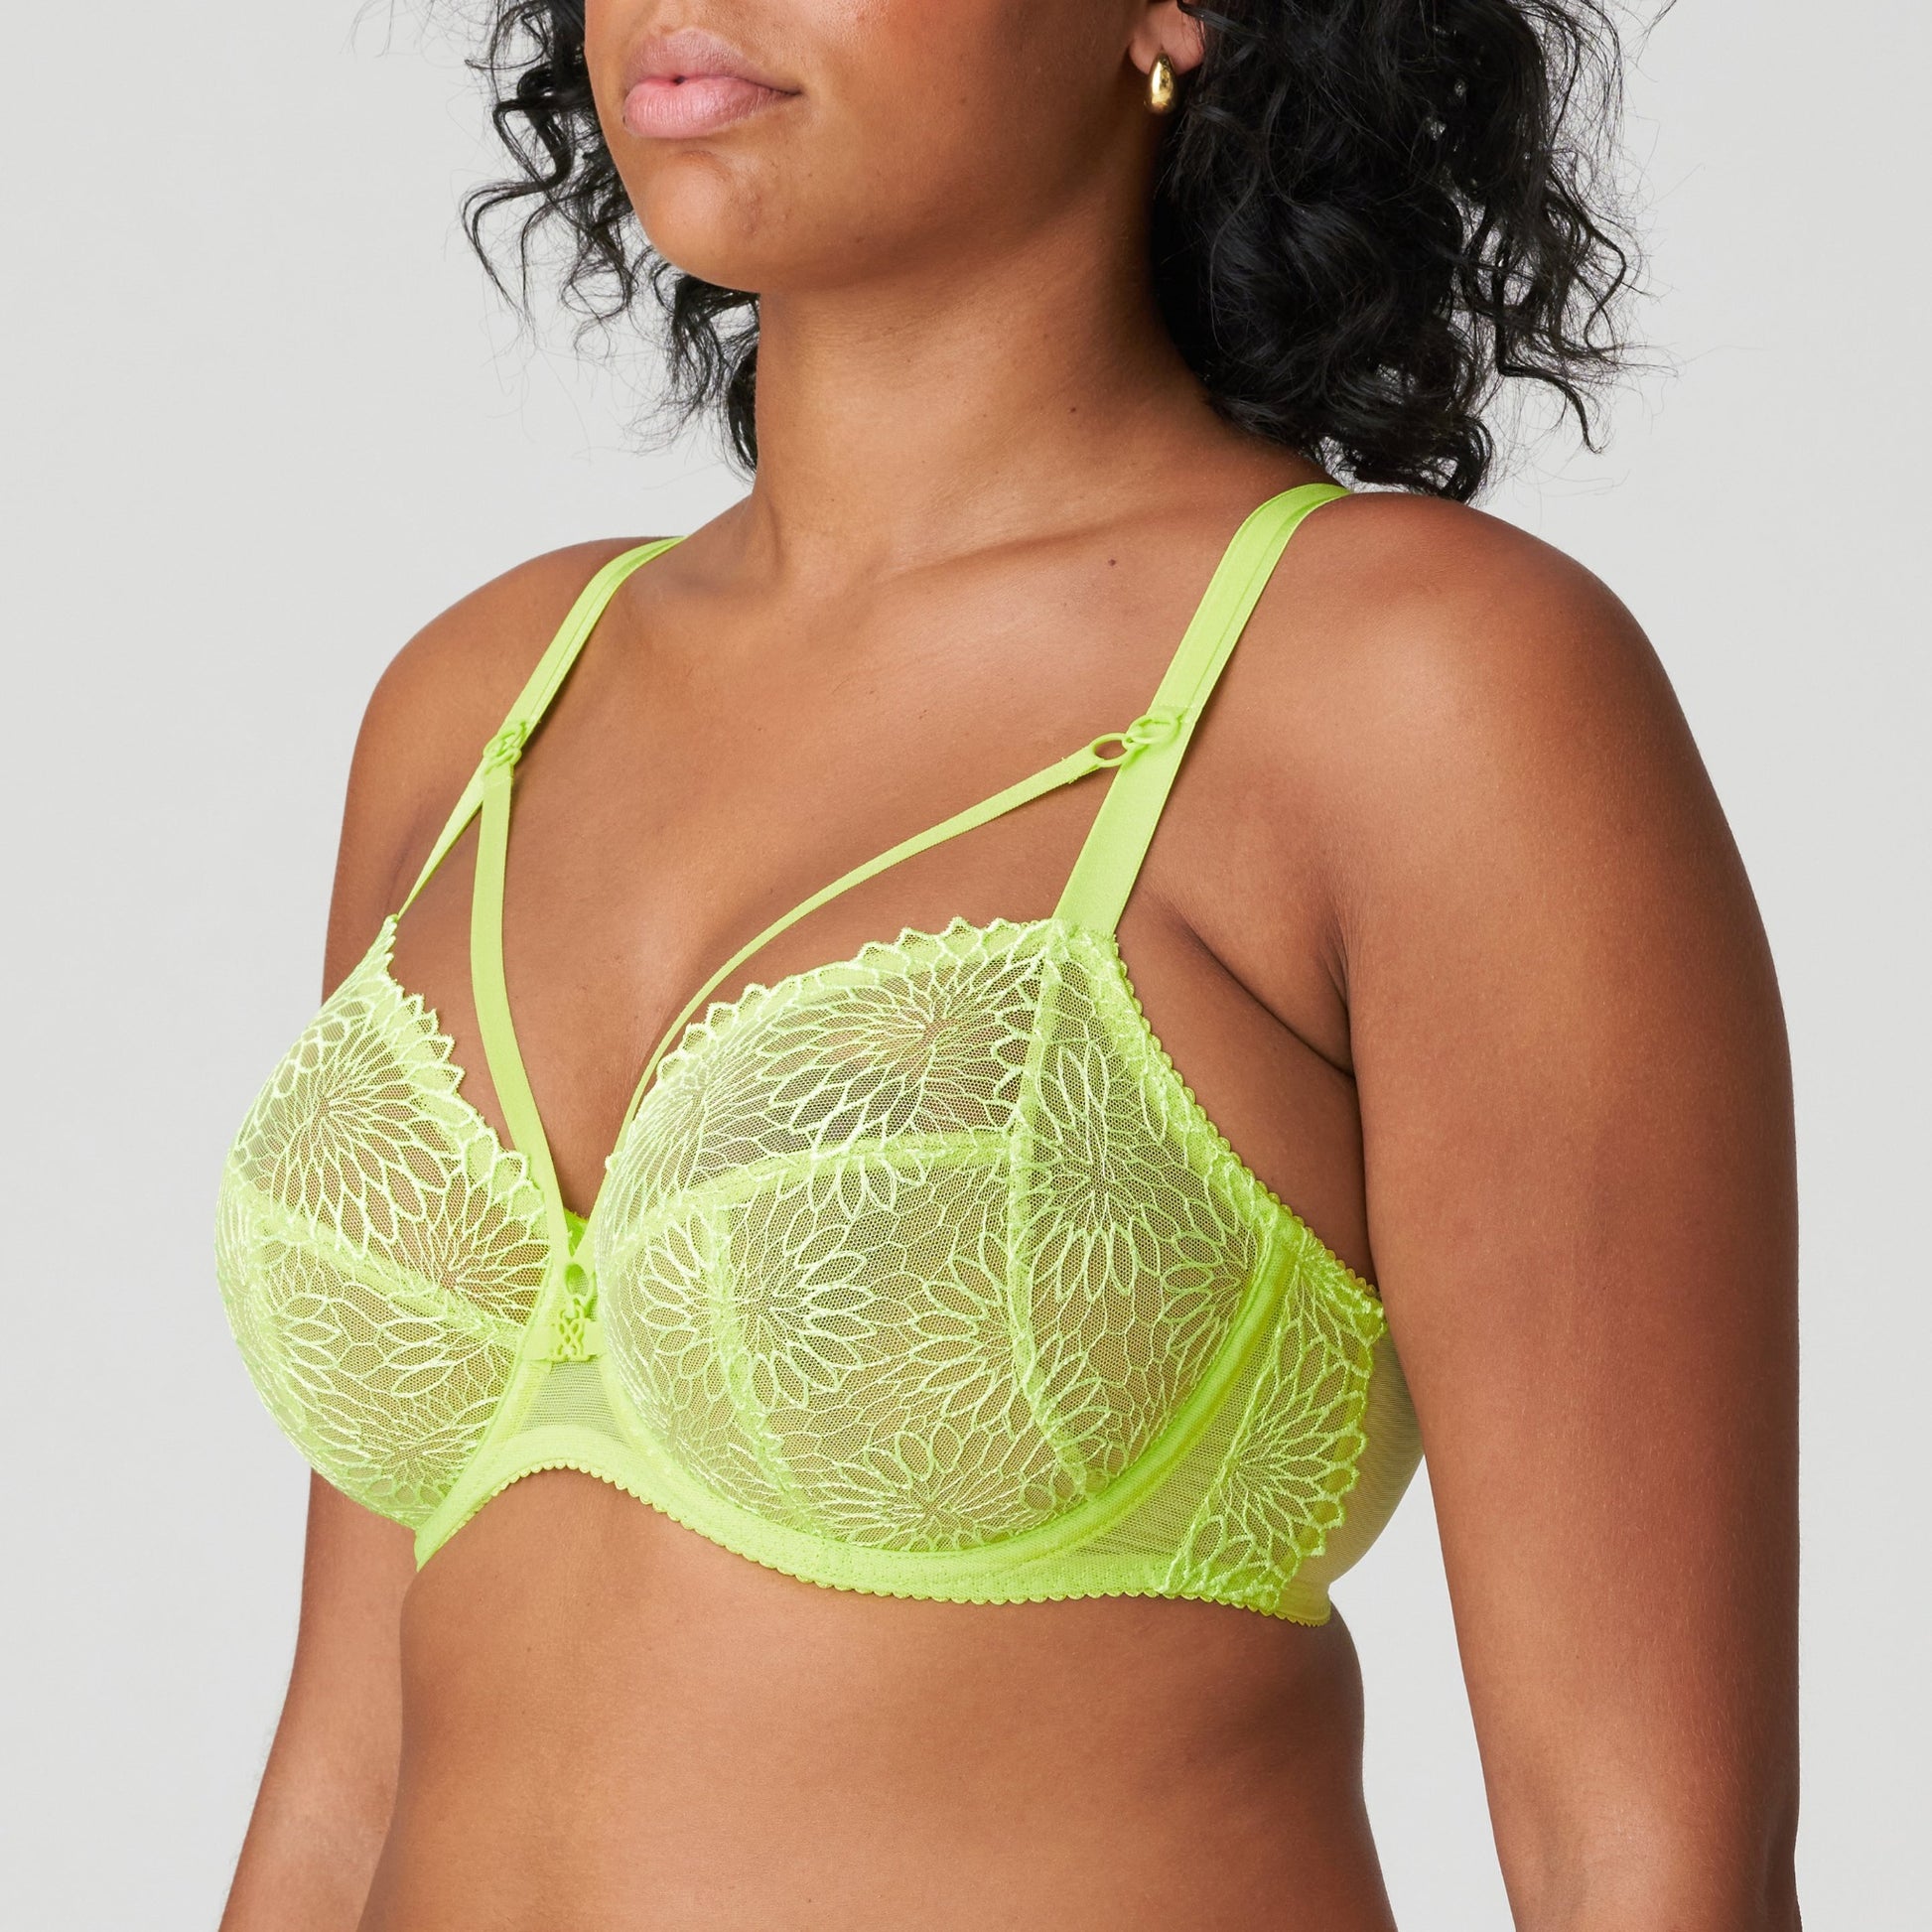 Side view of a woman wearing the DD+ Sophora Full Cup Bra in Lime Crush by PrimaDonna.